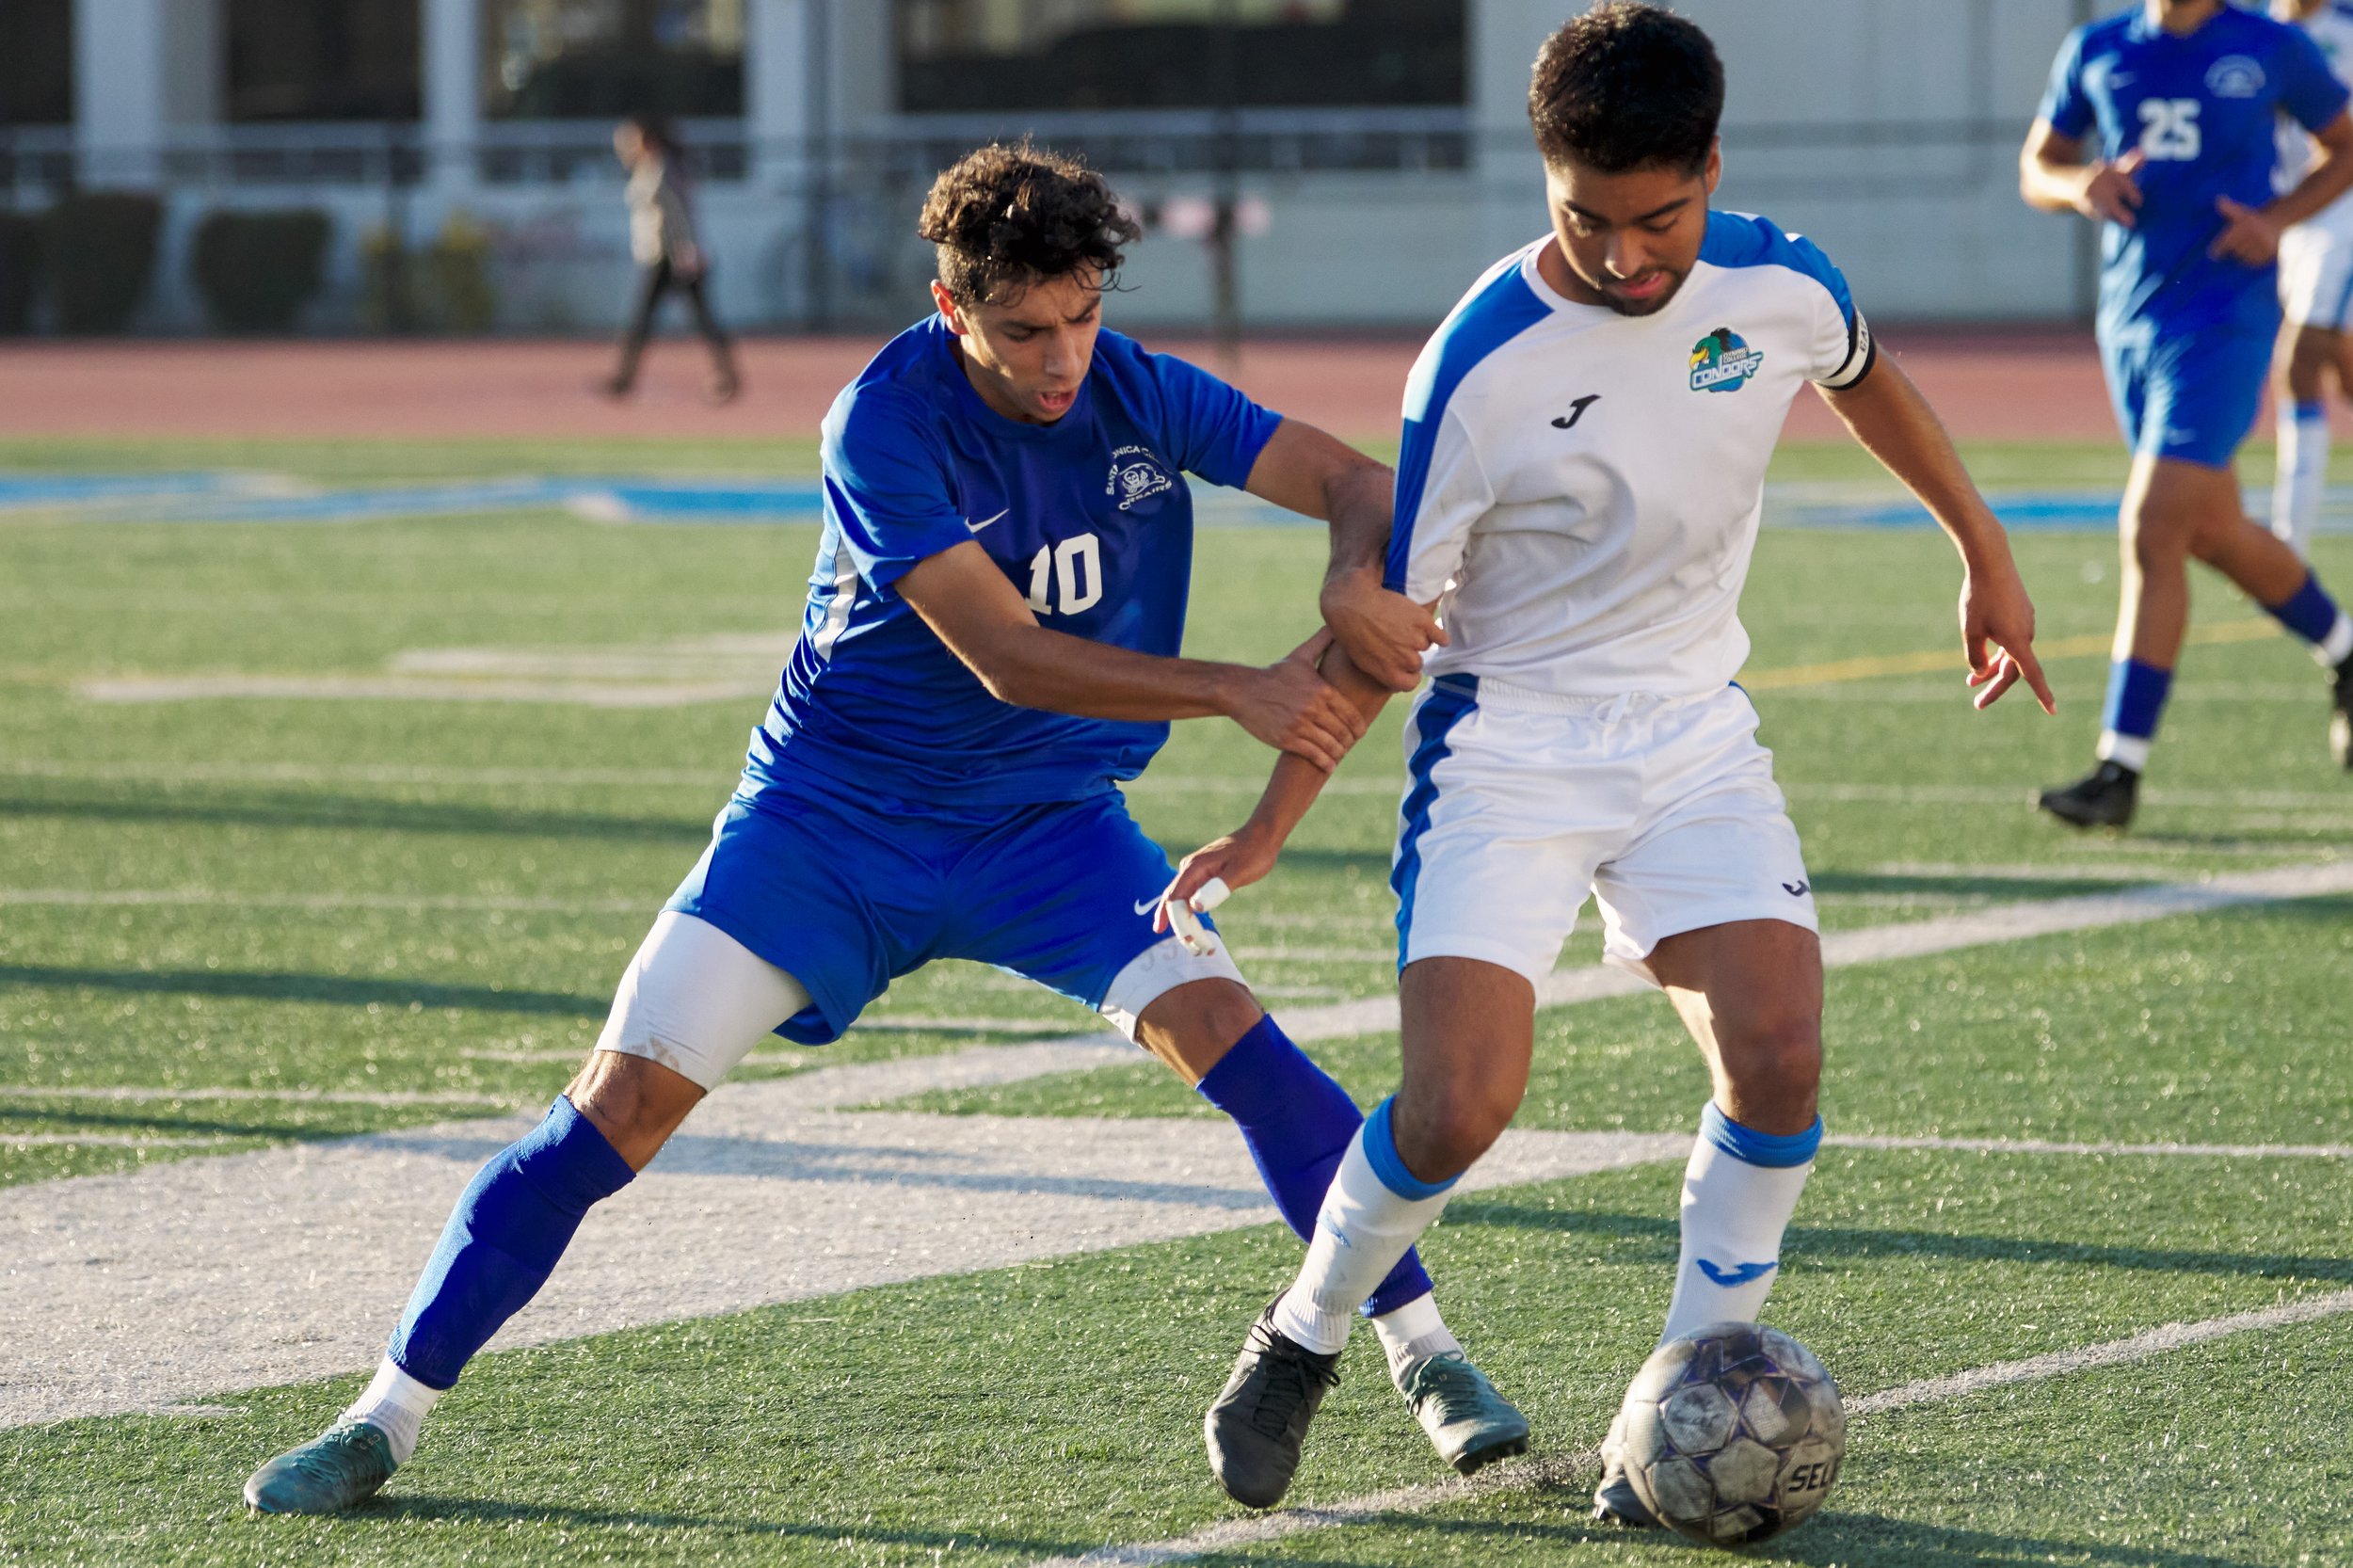  Santa Monica College Corsairs' Roey Kivity attempts to steal the ball from Oxnard College Condors' Ricardo Zizumbo during the men's soccer match on Tuesday, Oct. 18, 2022, at Corsair Field in Santa Monica, Calif. The Corsairs lost 0-3. (Nicholas McC